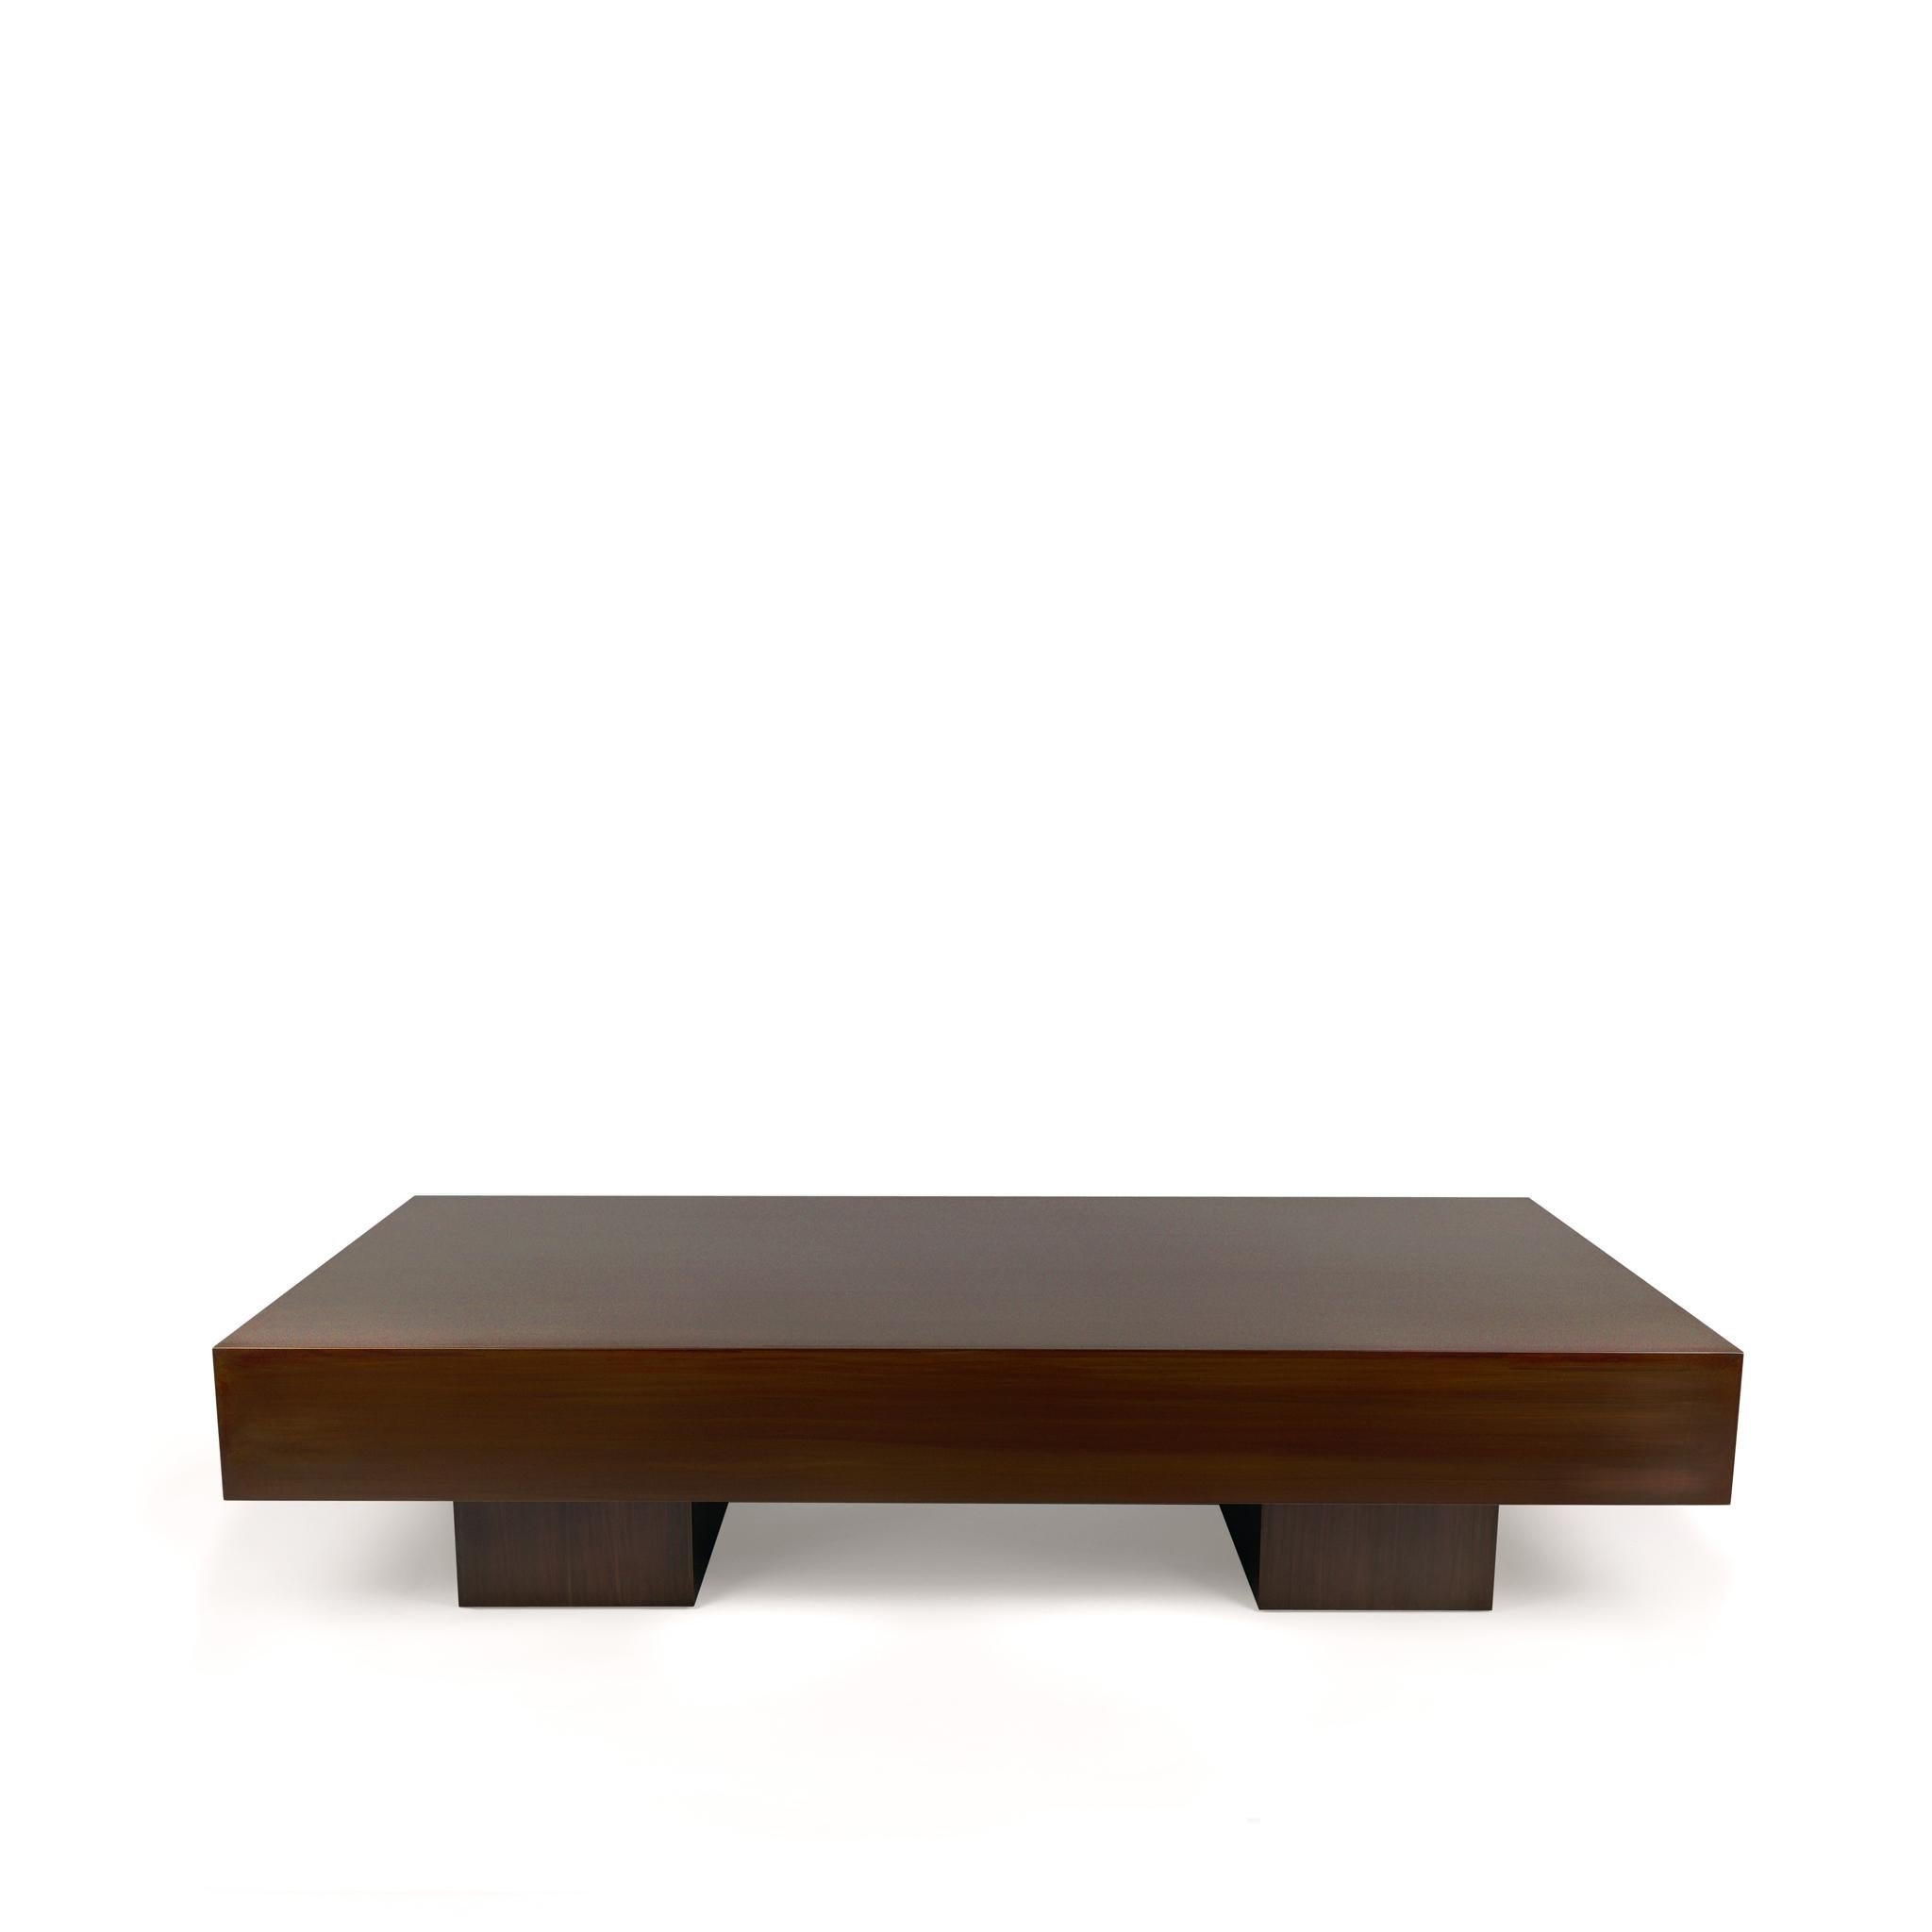 The Hiro table is a simple architectural piece, but with significant presence. Its sturdy and solid with a striking understated form. Hand finished with a warm, vintage bronze treatment that enhances its minimalist design and makes the piece a